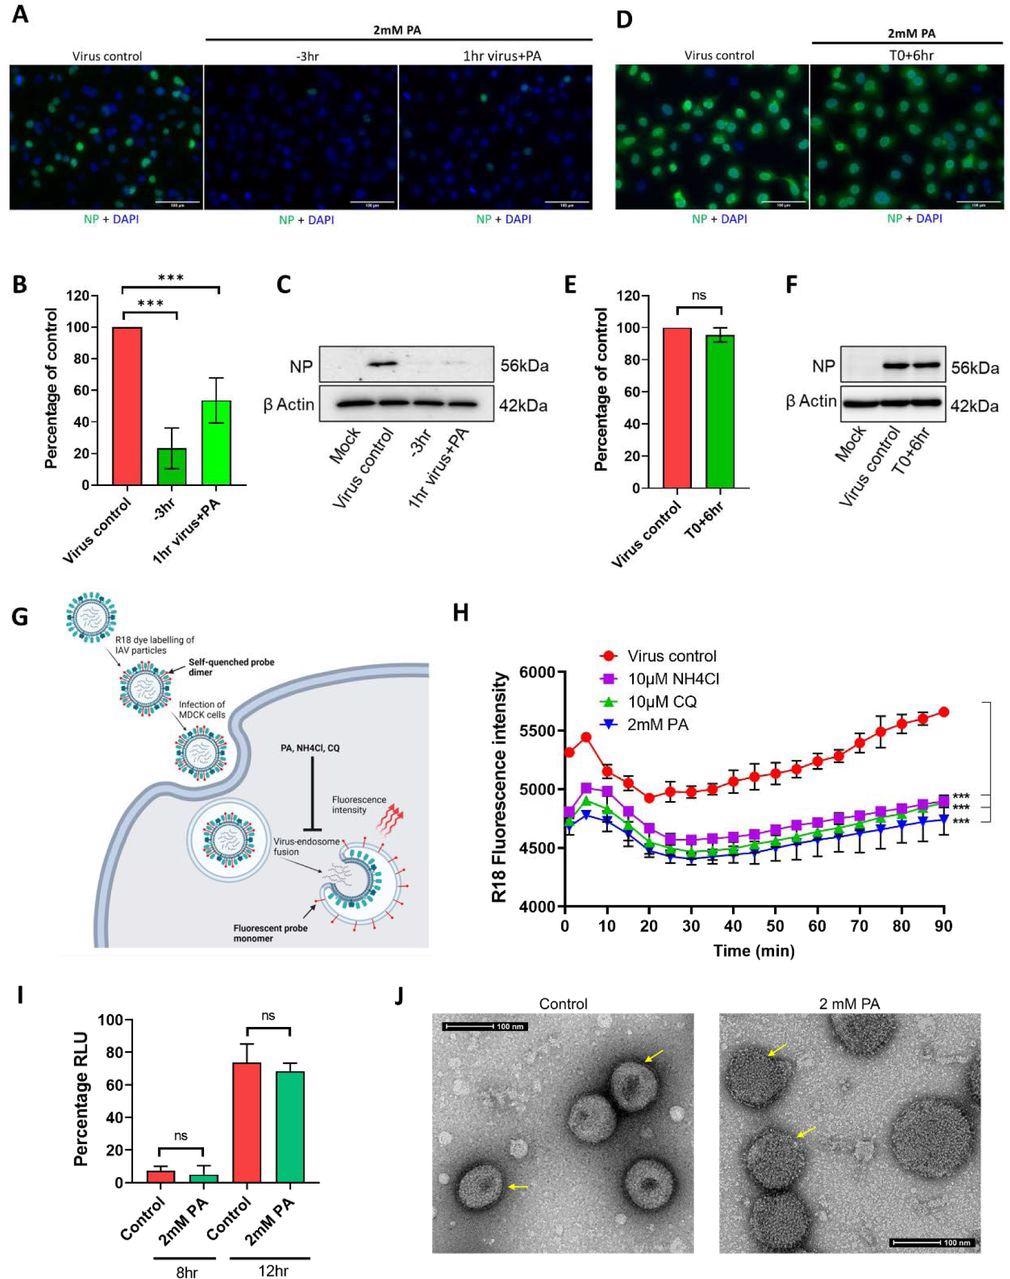 Picolinic Acid inhibits IAV entry by interfering with Viral-Cellular endocytic membrane fusion and affecting viral membrane integrity. (A-C) A549 cells were either pre-treated for 3hr with 2mM PA, infected with 2 MOI PR8 WT in presence of the drug, and collected 3hr later (−3hr) or the virus was incubated with 2mM PA for 1hr and used for infection (1hr virus + PA). Microscopy data for A549 cells labeled with influenza virus nucleocapsid protein are shown in (A), quantification of NP positive cells is shown in (B), and (C) shows corresponding western blot data. (D-F) A549 cells were first infected with 2 MOI PR8 WT, PA treatment was done 6hr p.i (T0+6hr) and cells were collected a further 3hr later. Microscopy images with quantification and western blot analysis are shown in (D), (E), and (F). ***p < 0.001; ns - not significant using two-tailed unpaired t-test or one-way ANOVA with Dunnett’s multiple comparison test where applicable. Error bars represent mean ± standard deviation. (G) Pictorial representation of virus-endosome membrane fusion assay using R-18 labeled IAV particles. After infection of MDCK cells, the labeled virus particles enter endosomes, and upon pH-dependent fusion of virus and endosomal membranes, results in the de-quenching of R-18 probe dimers and subsequent increase in fluorescence intensity. Created with Biorender. (H) A549 cells were pre-treated with either 2mM PA, 10µM NH4Cl, or 10µM CQ, infected with R18 labeled PR8 WT virus on ice, transferred to a plate reader at 37°C and fluorescence intensity measurements were acquired at 10 min intervals. ***p < 0.001, using one-way ANOVA with Dunnett’s multiple comparison at 90 min time point. (I) HEK293T cells were transfected with plasmids expressing influenza virus PA, PB1, PB2, NP, and NP-firefly luc, along with pRLTK. 2mM PA was added 3hr post-transfection and cells were harvested 8 and 12hr later. Results show luciferase units normalized to untreated control. ns - not significant using two-tailed unpaired t-test. Error bars represent mean ± standard deviation. (J) Concentrated PR8 WT virus particles were incubated with vehicle control or 2mM PA for 3hr, mounted on copper grids, and processed for TEM imaging. Arrows indicate differences in the integrity of viral double-layered membranes in control and treated conditions.